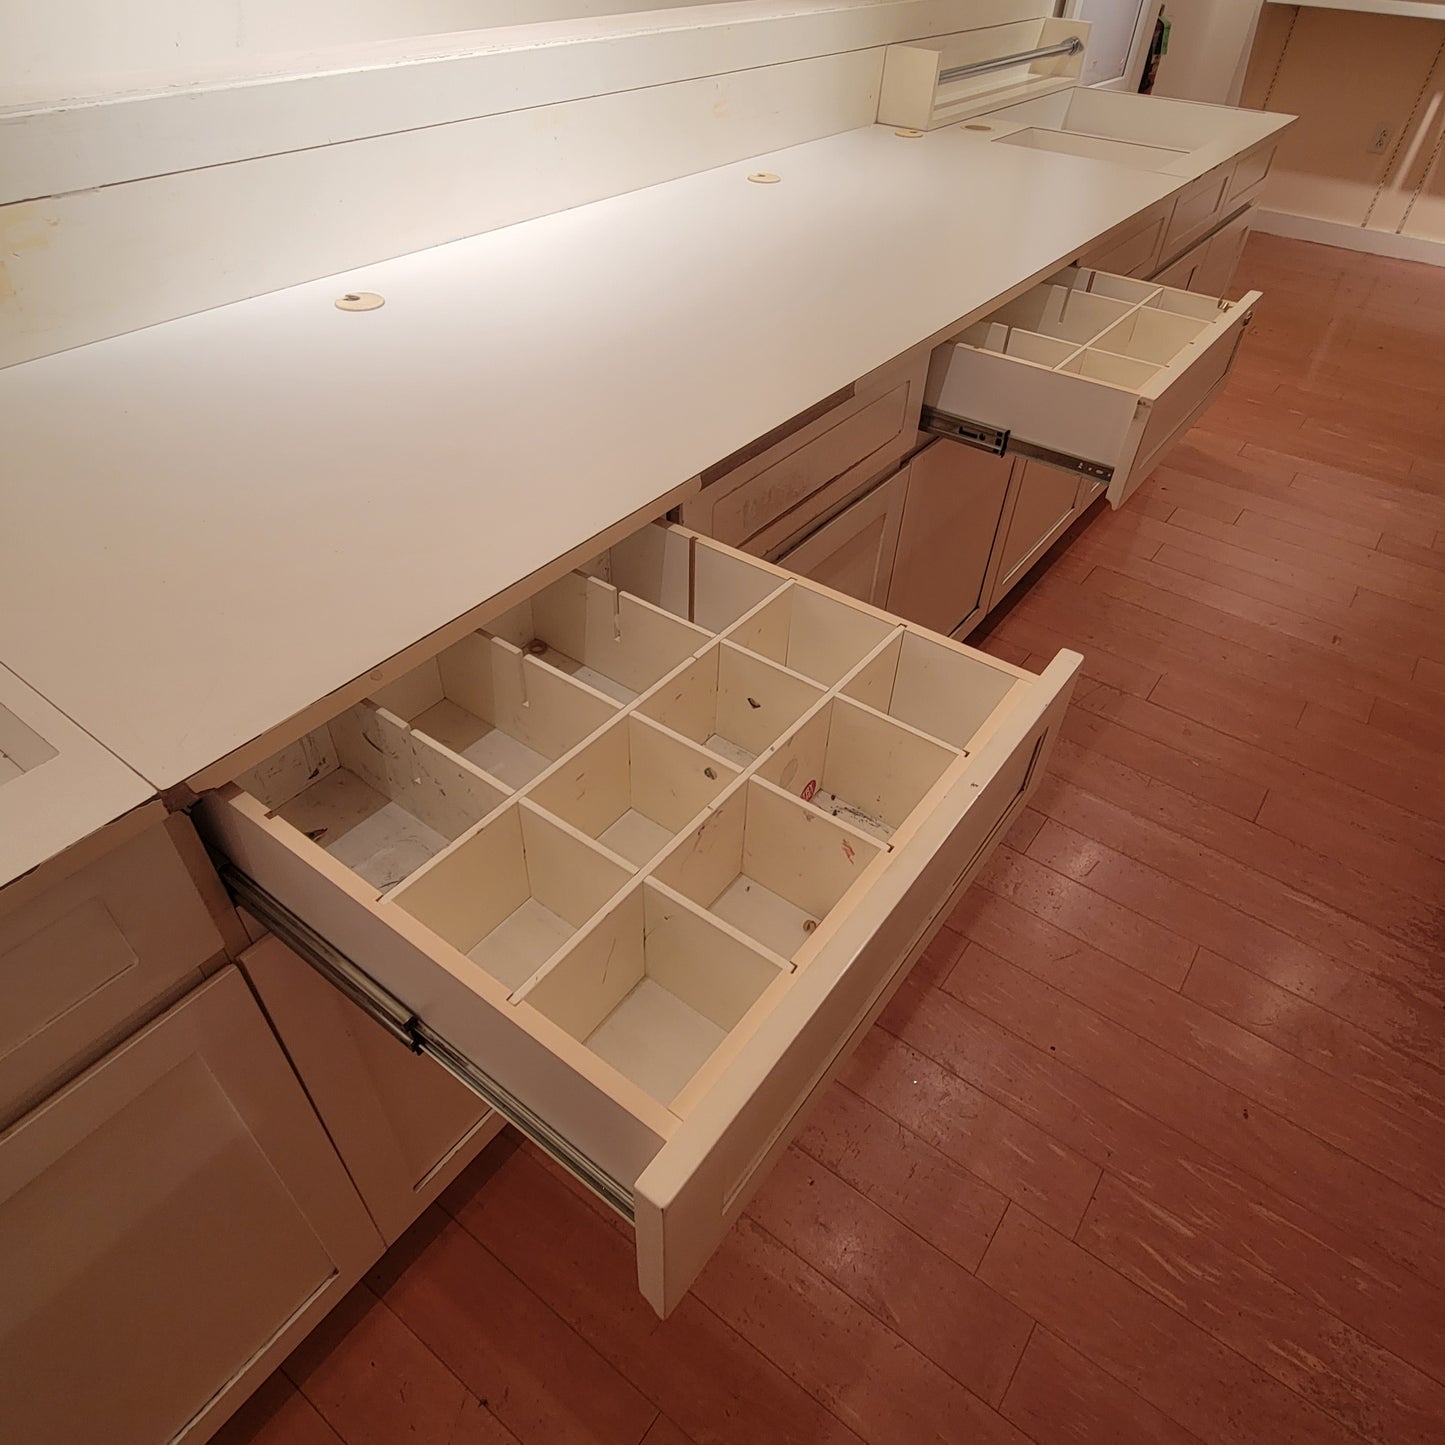 Countertop w/Drawers and Cabinets